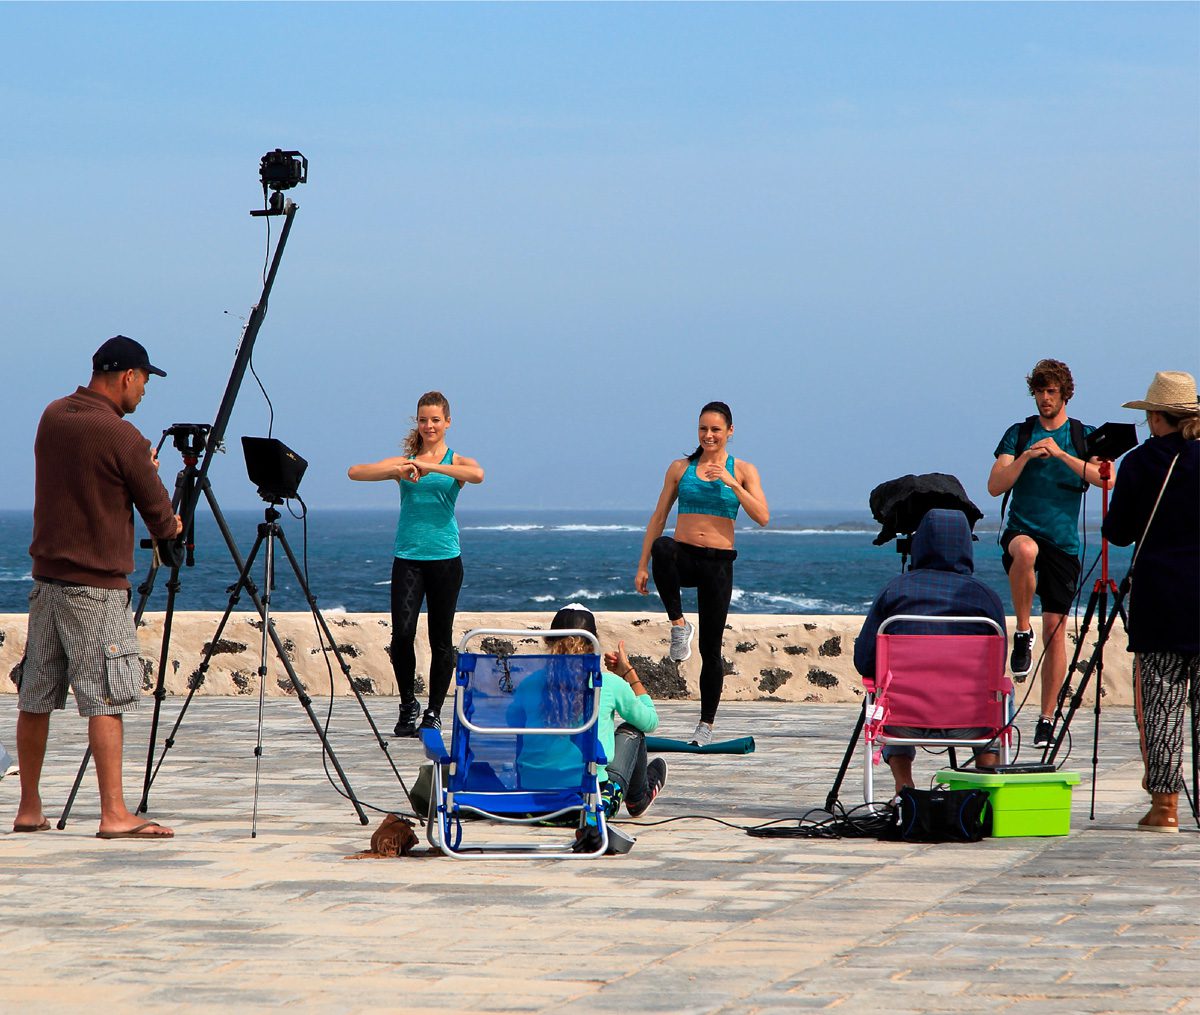 Promotional models conducting a demonstration on the beach in front of a camera crew